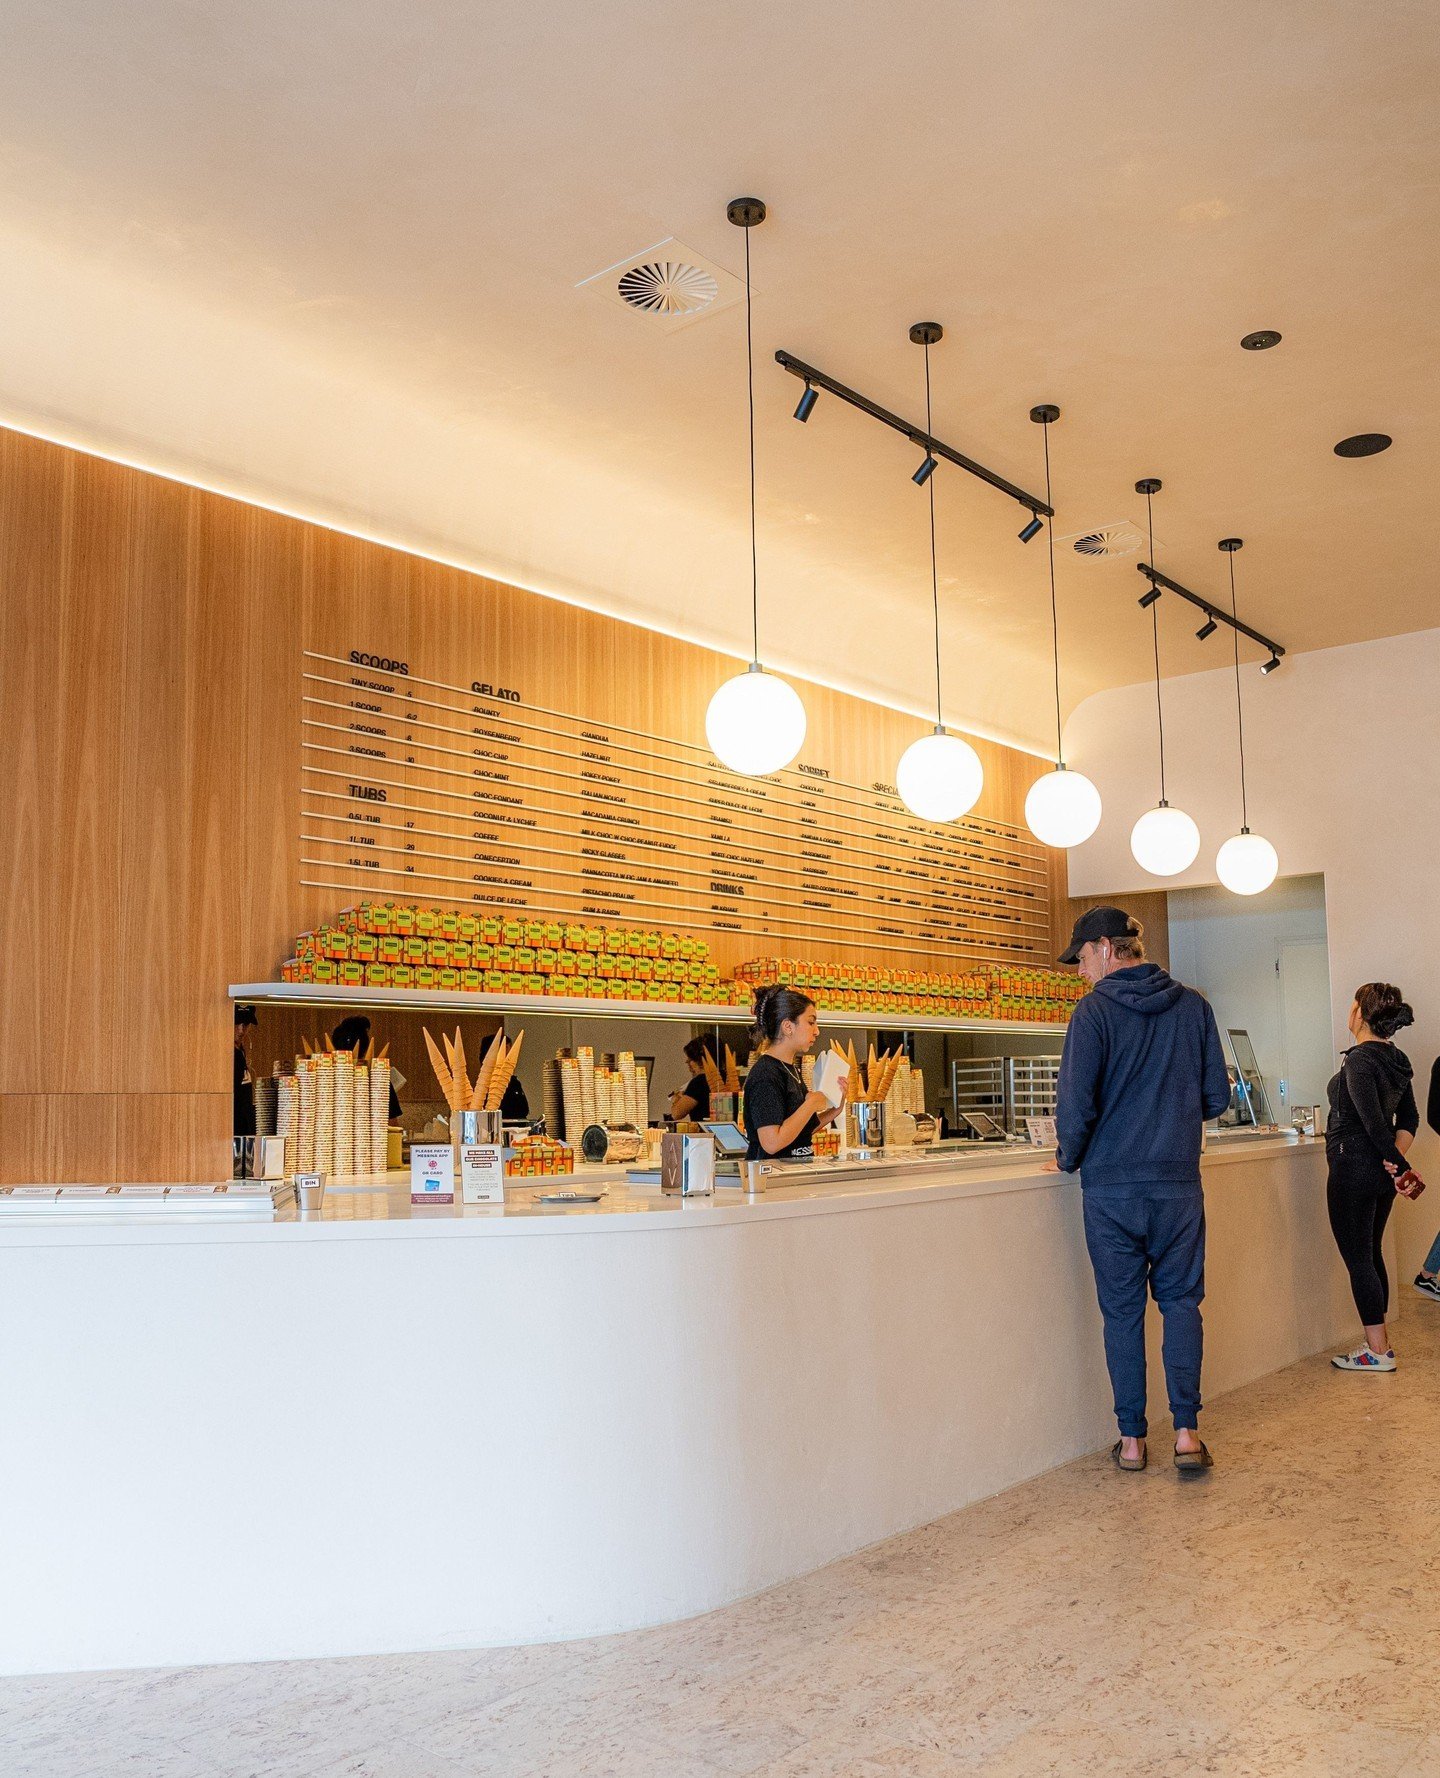 Revisiting Gelato Messina in Malvern, Melbourne 🍦⁠
⁠
Hospitality spaces elevated. Brought to you by the LG team.